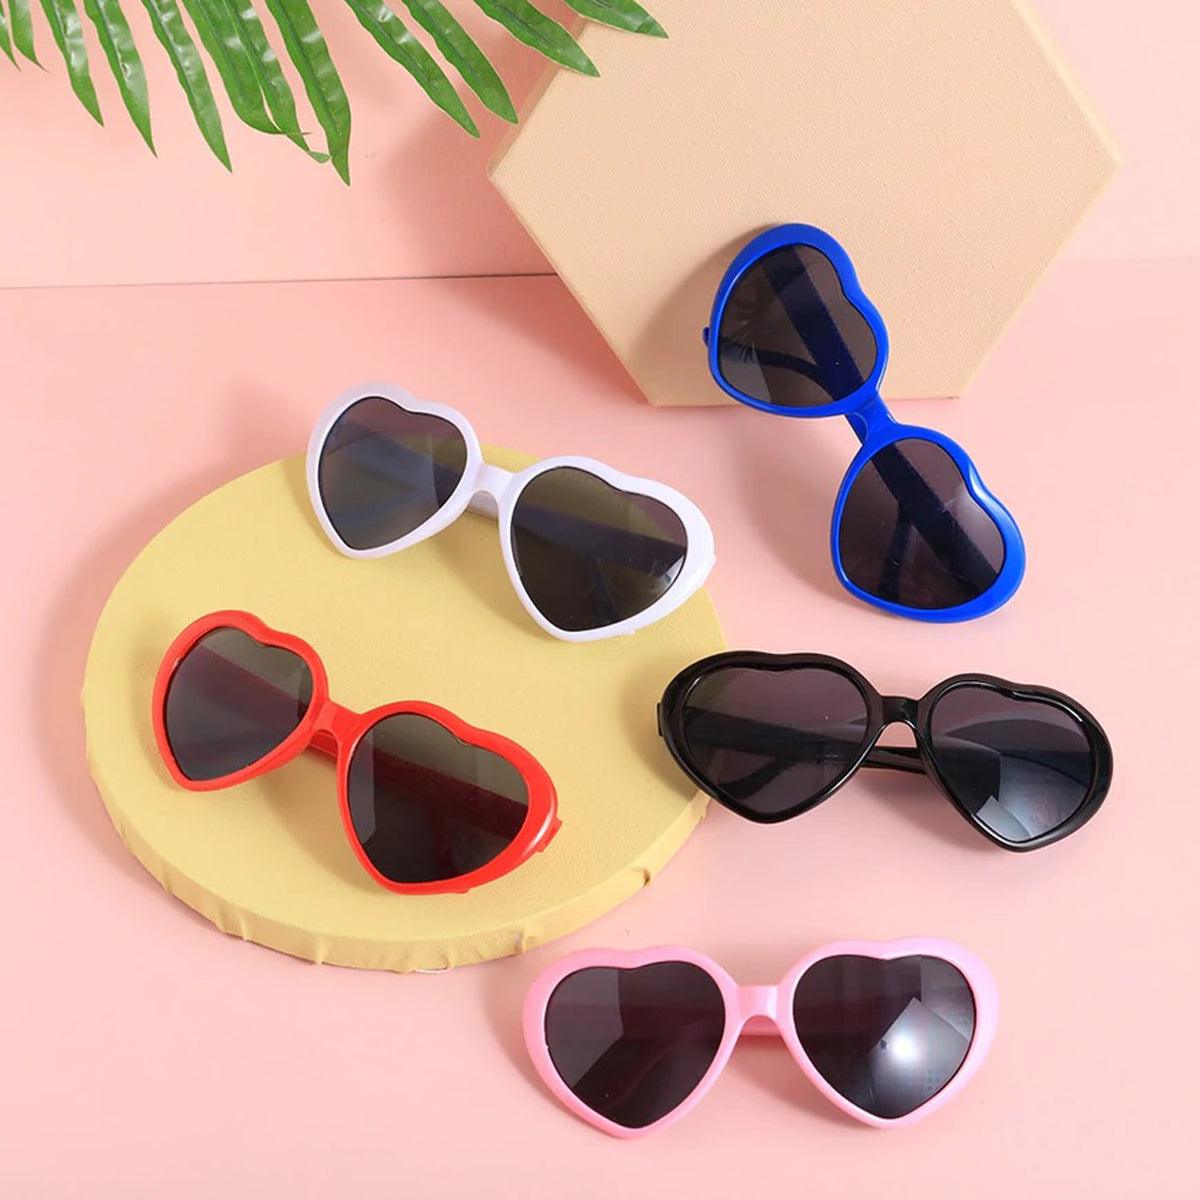 GloFX Heart Diffraction Glasses - Aesthetic Clothes Shop